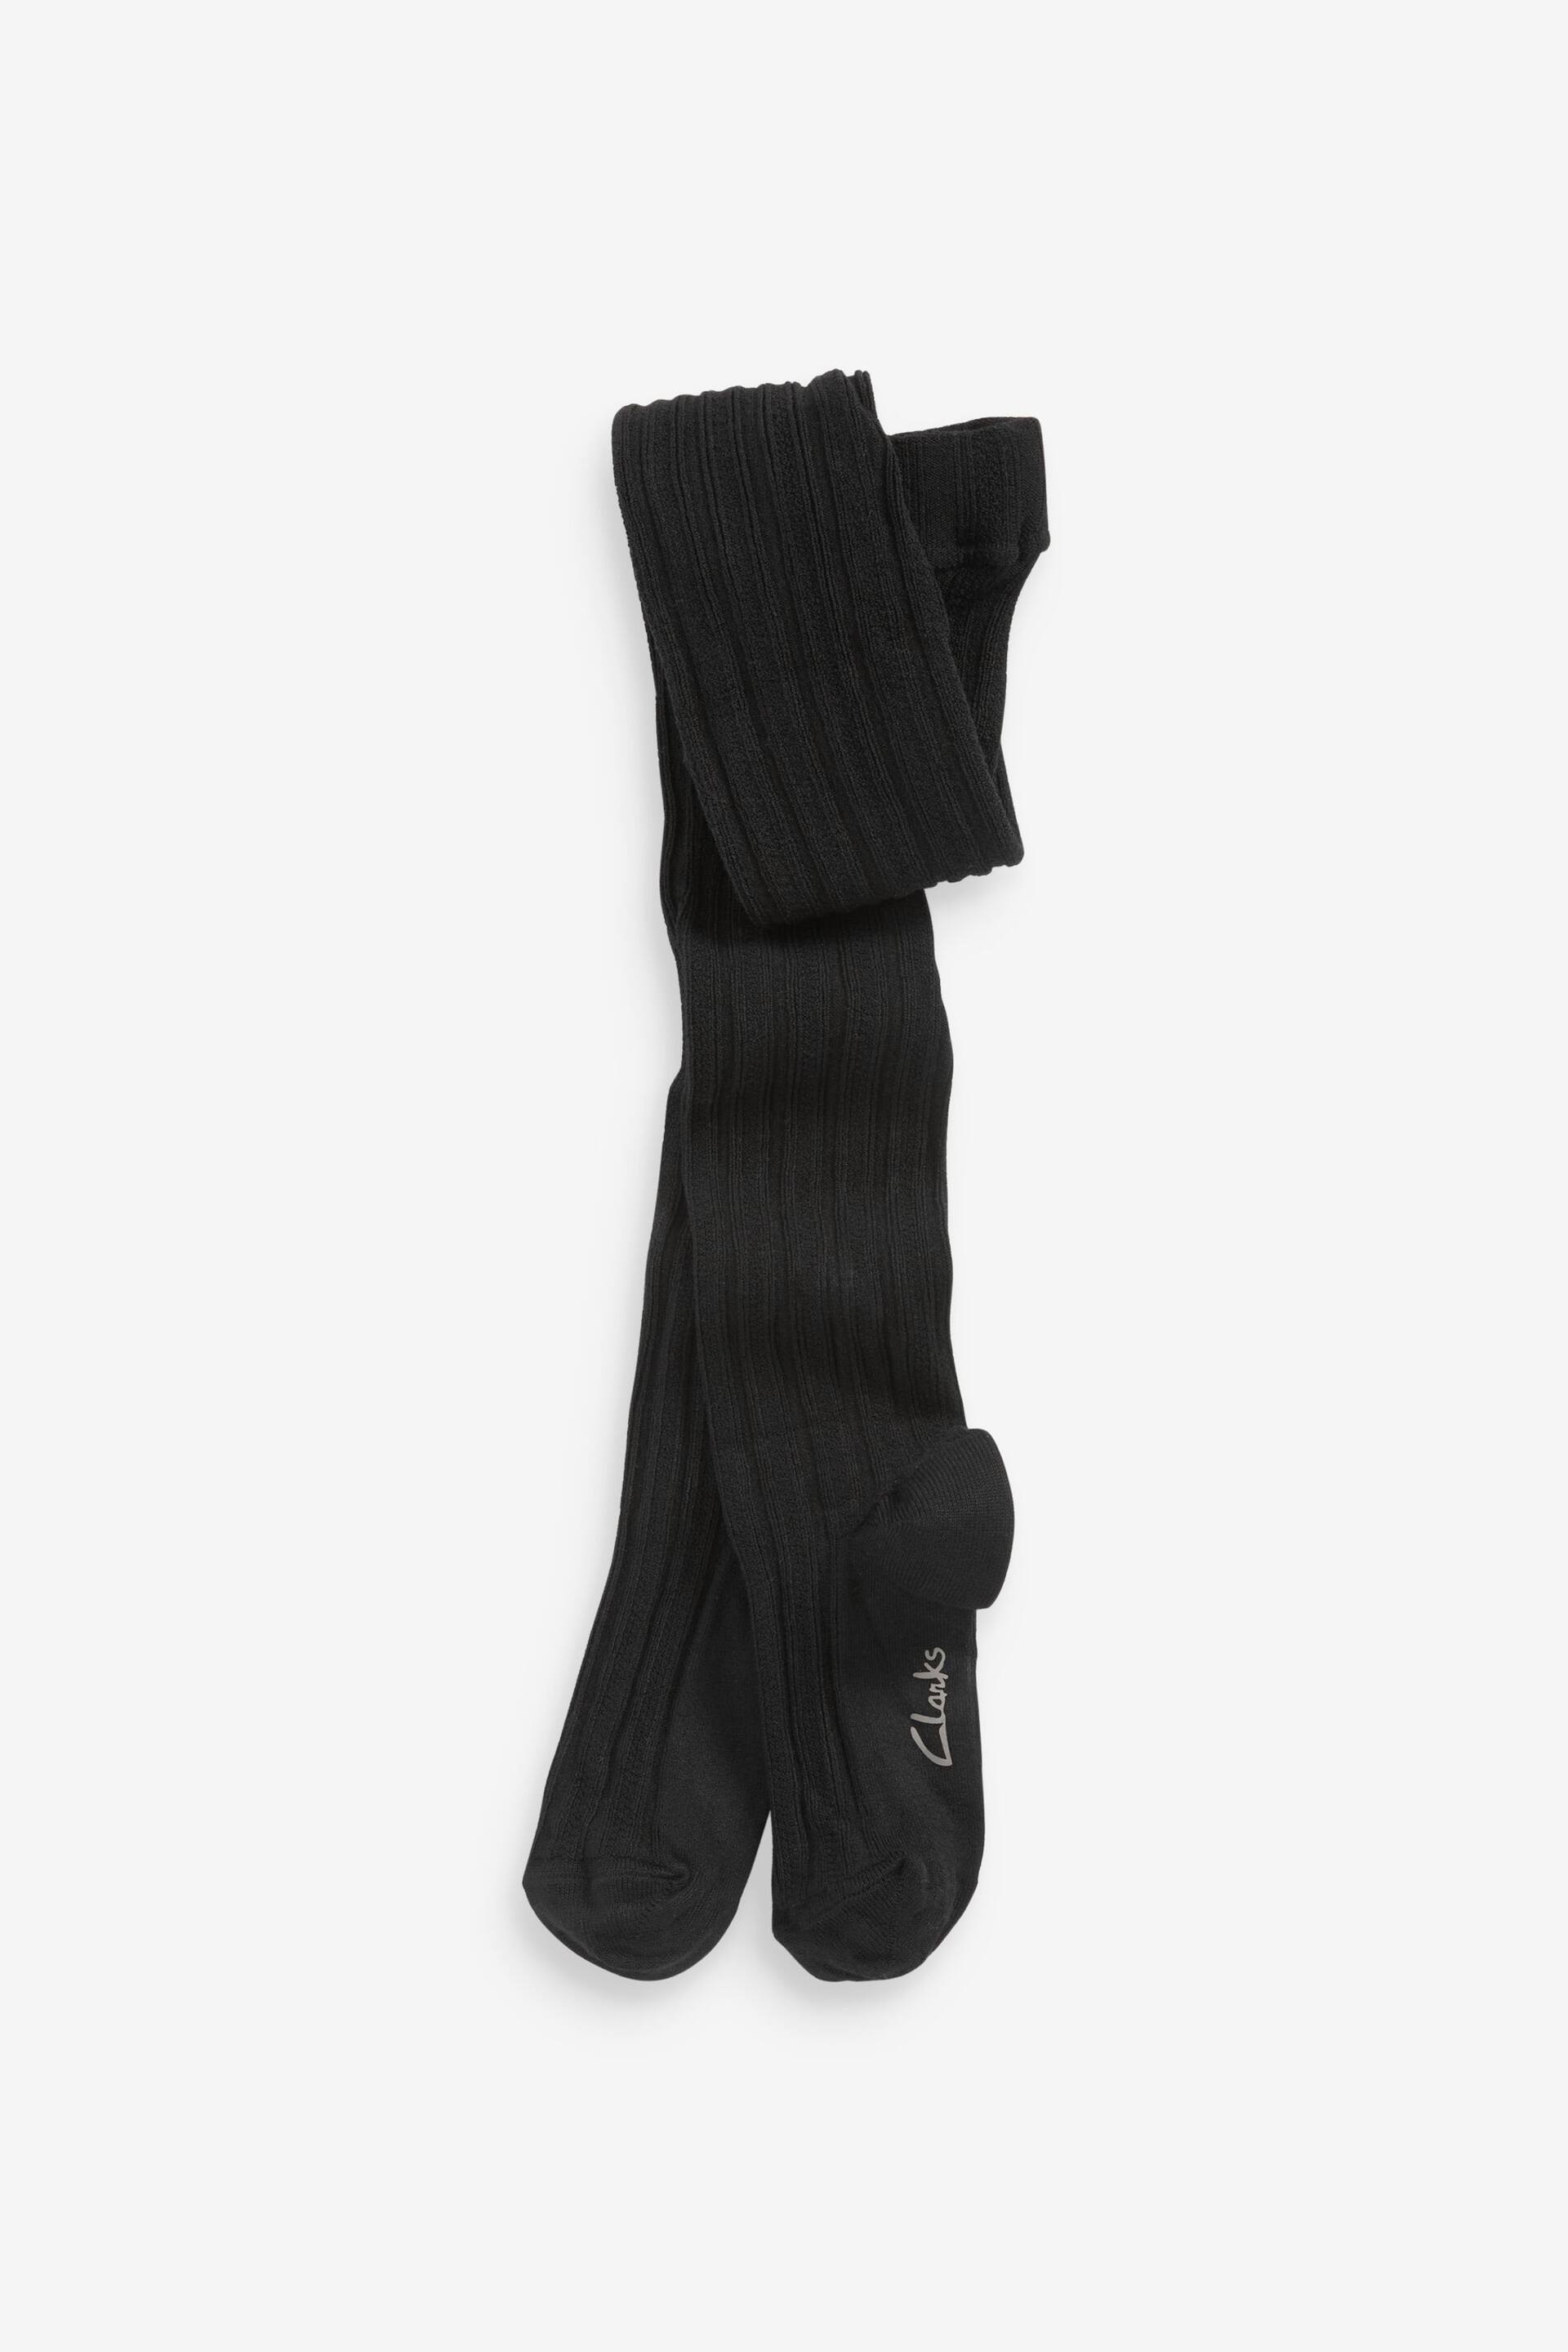 Clarks Black Ribbed Tights 2 Pack - Image 2 of 3